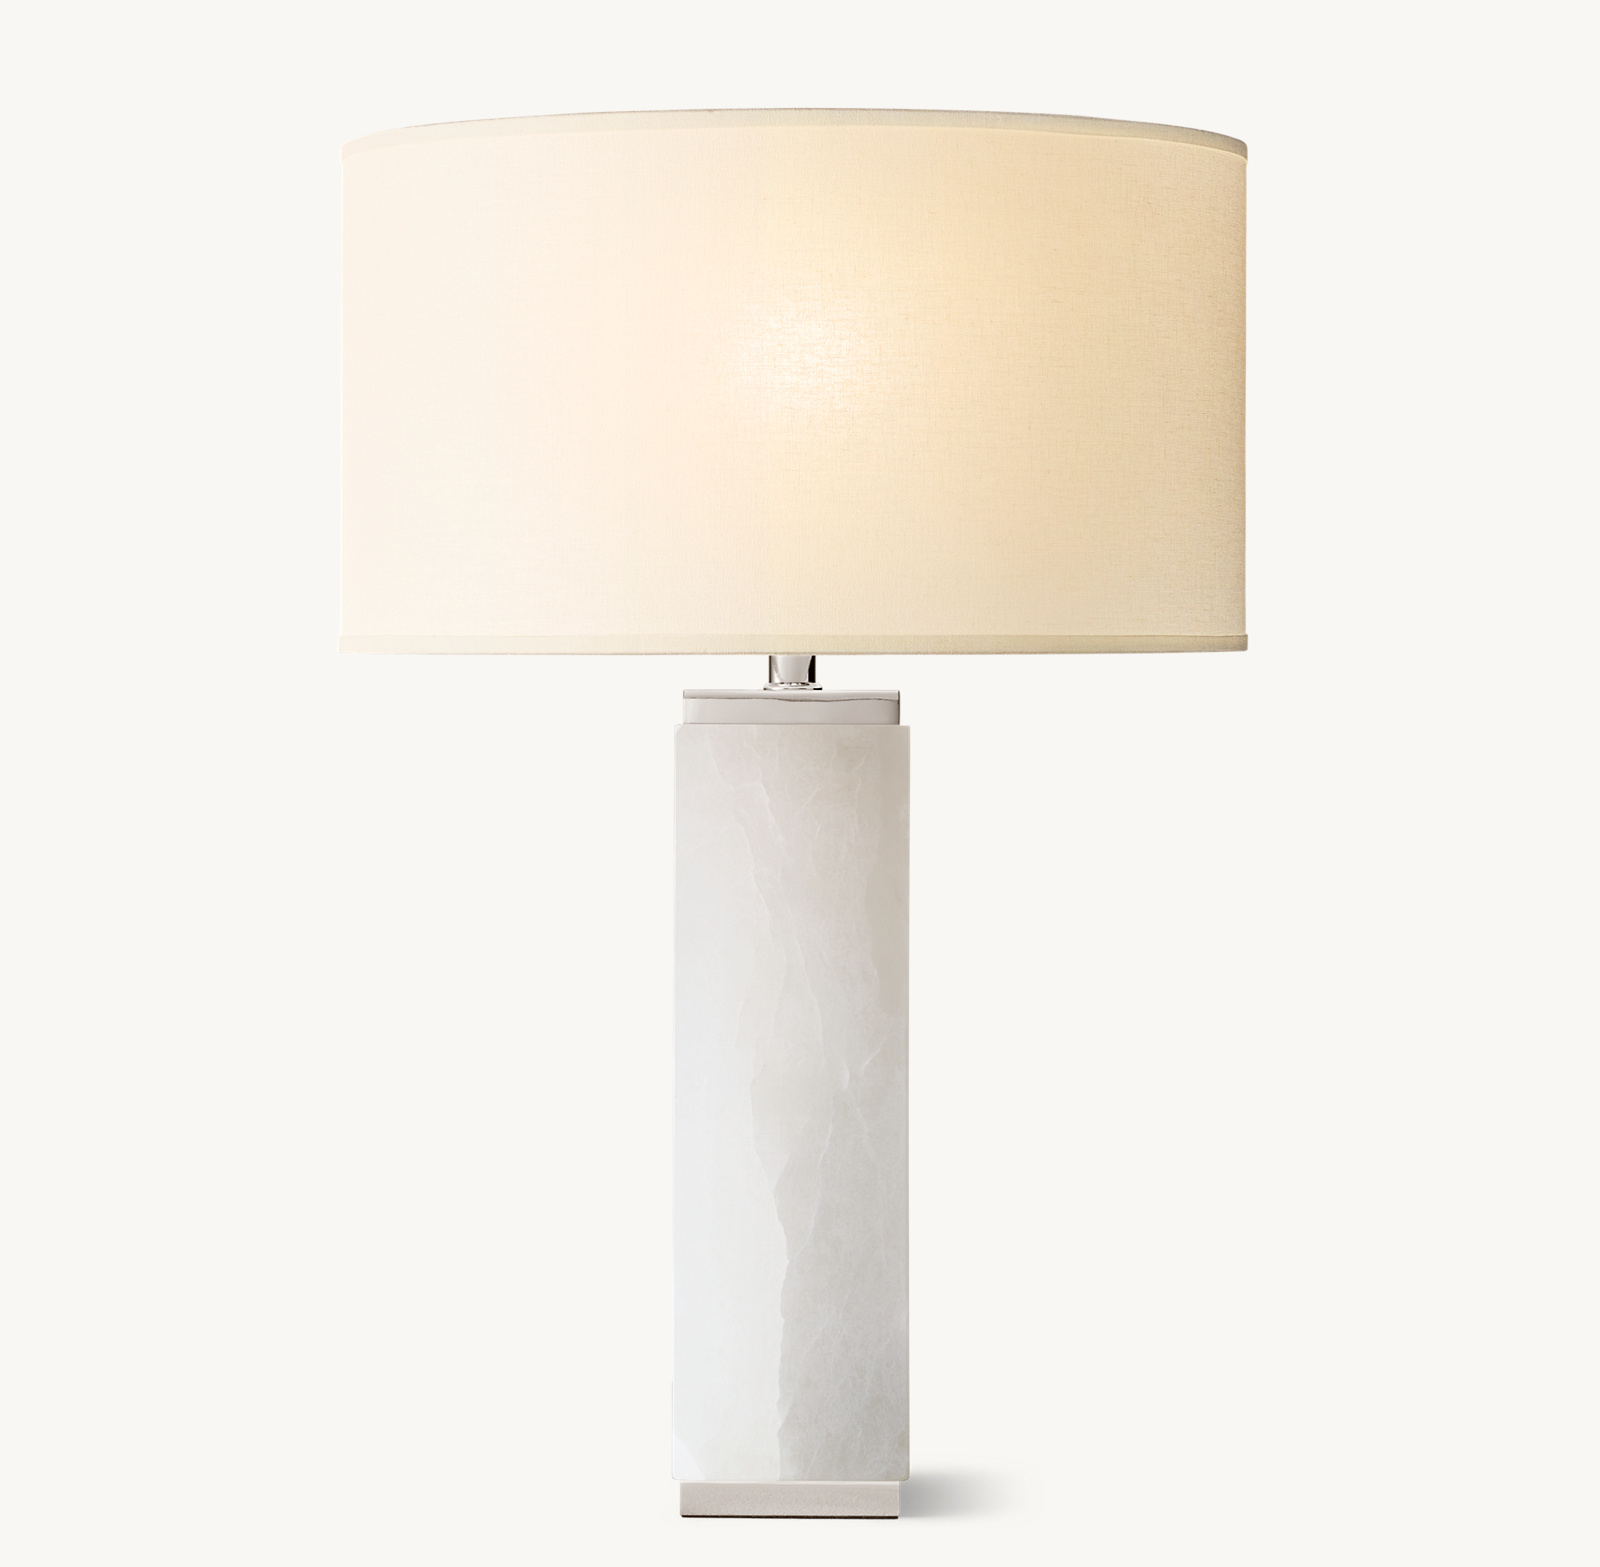 Shown in Polished Nickel with French Drum Linen Shade, size F, in White Linen and Frosted lining (sold separately).